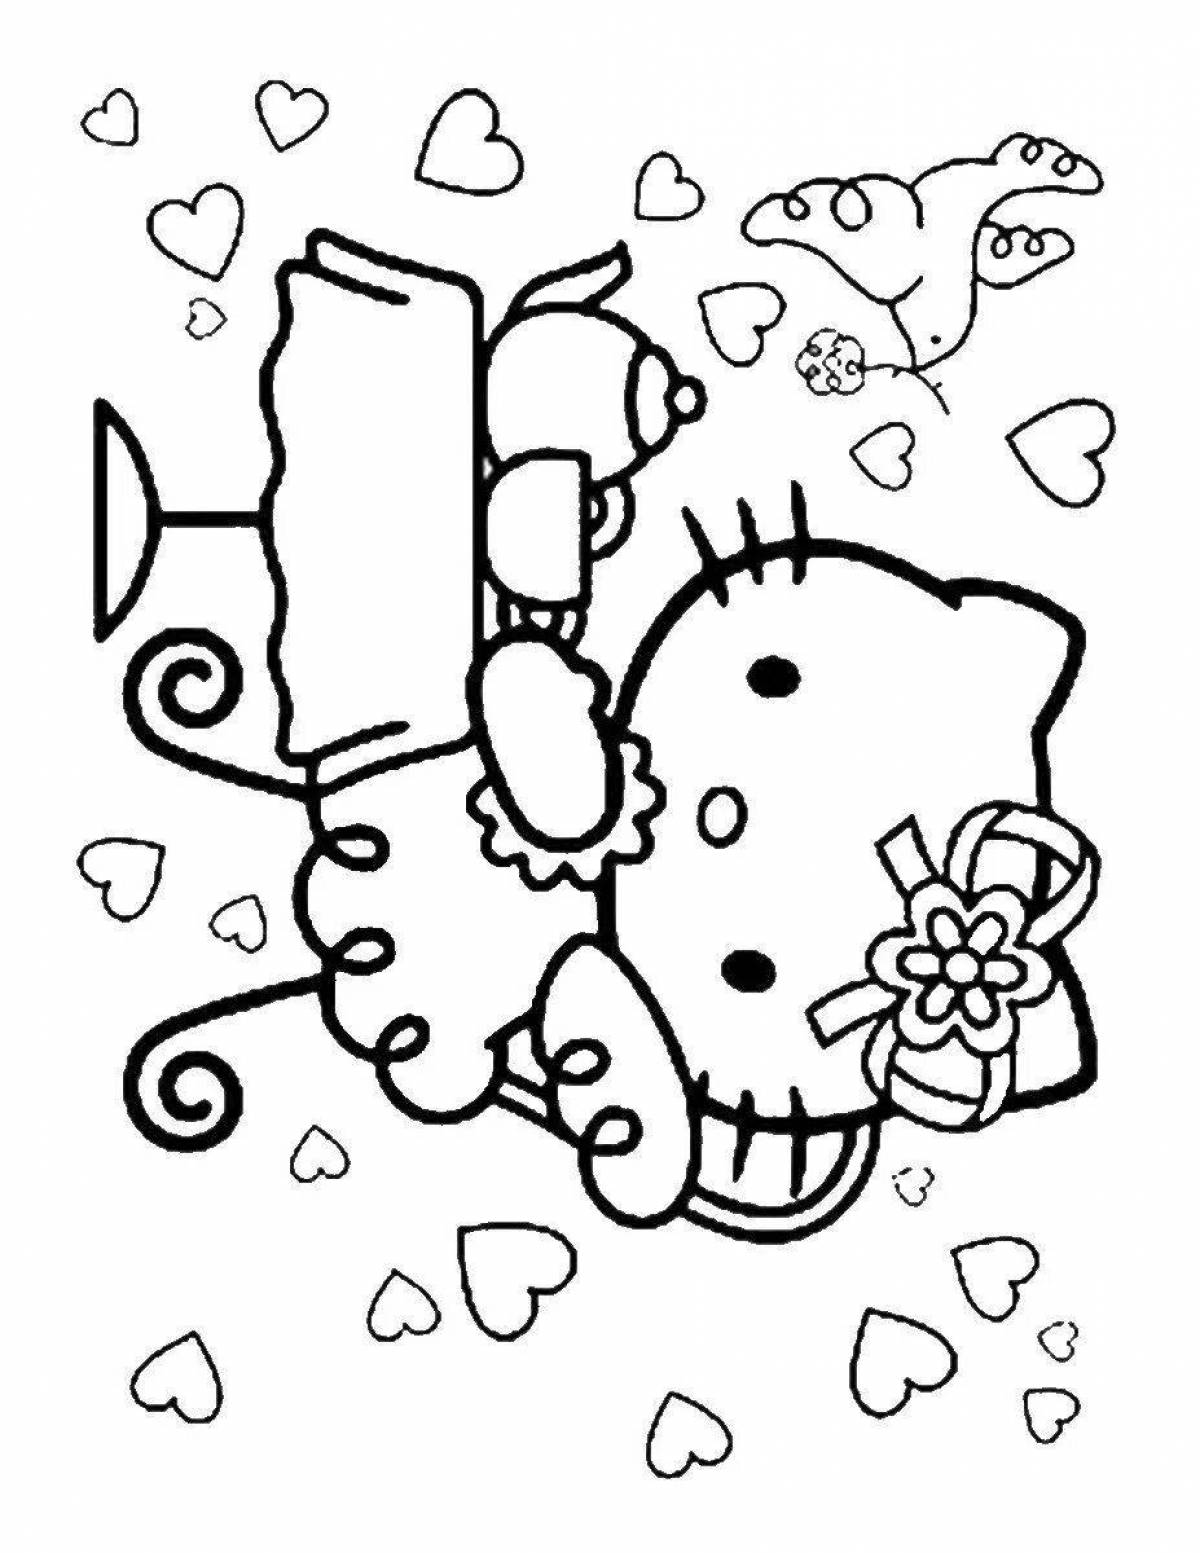 Playful hello kitty coloring page